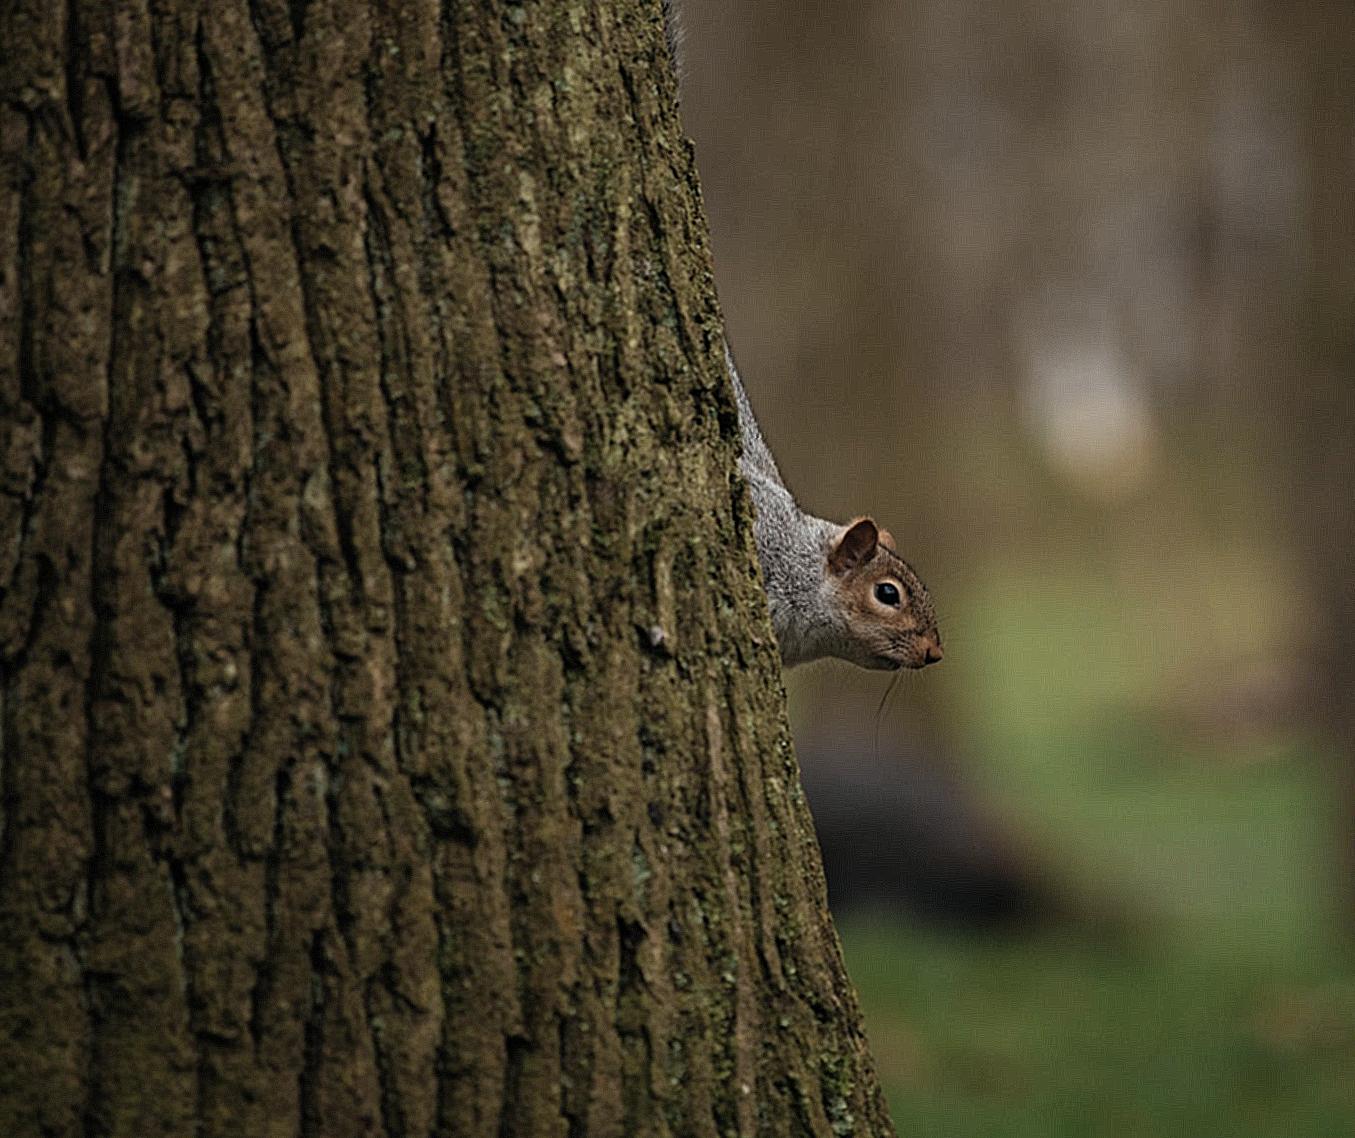 Small squirrel on trunk of tree in forest